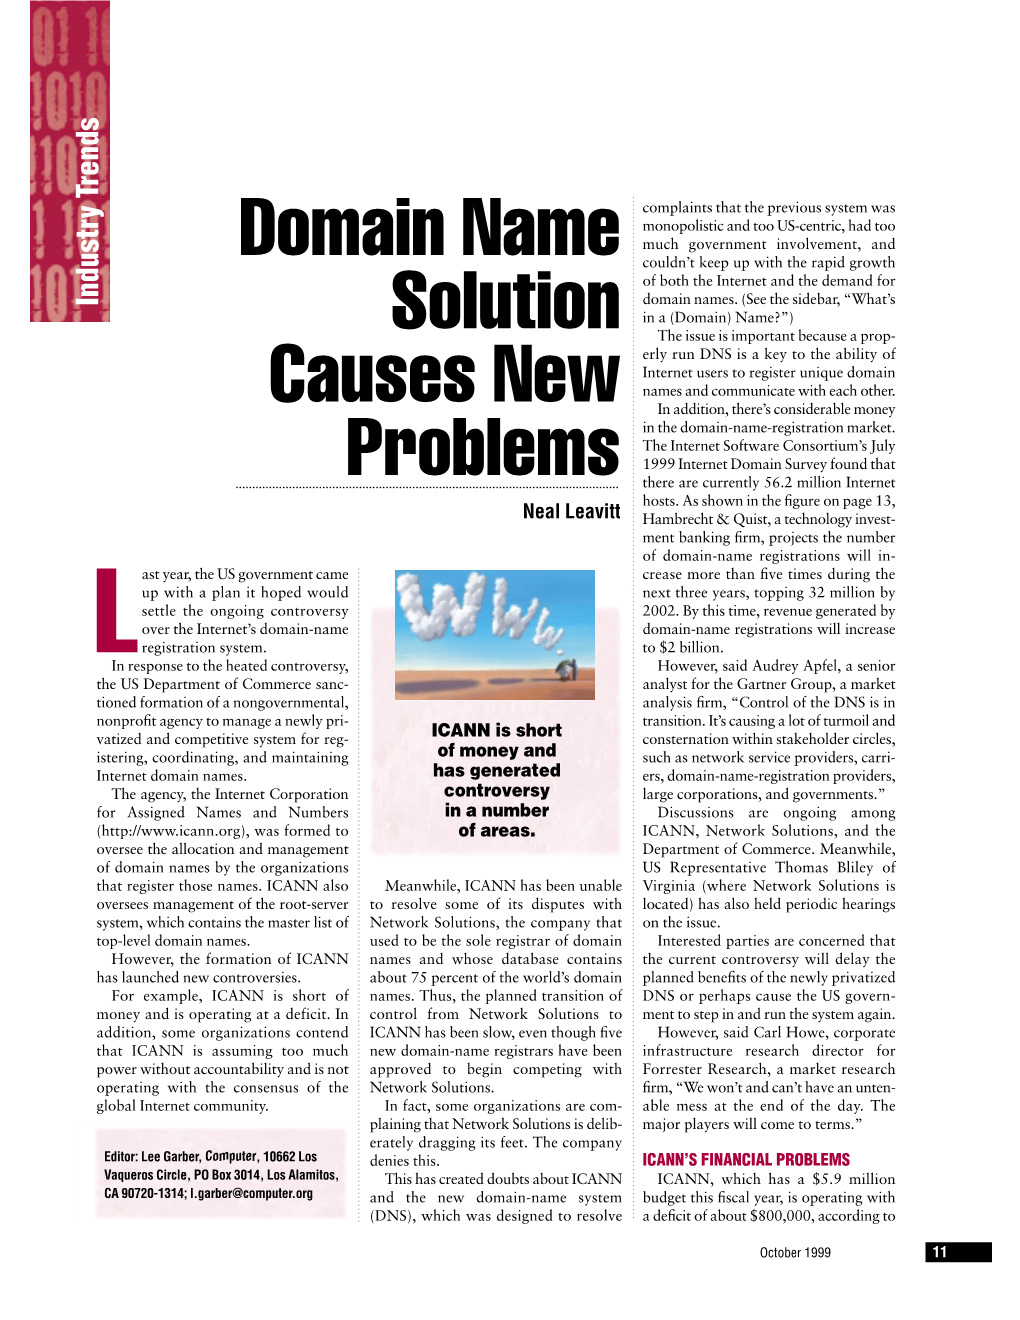 Domain Name Solution Causes New Problems